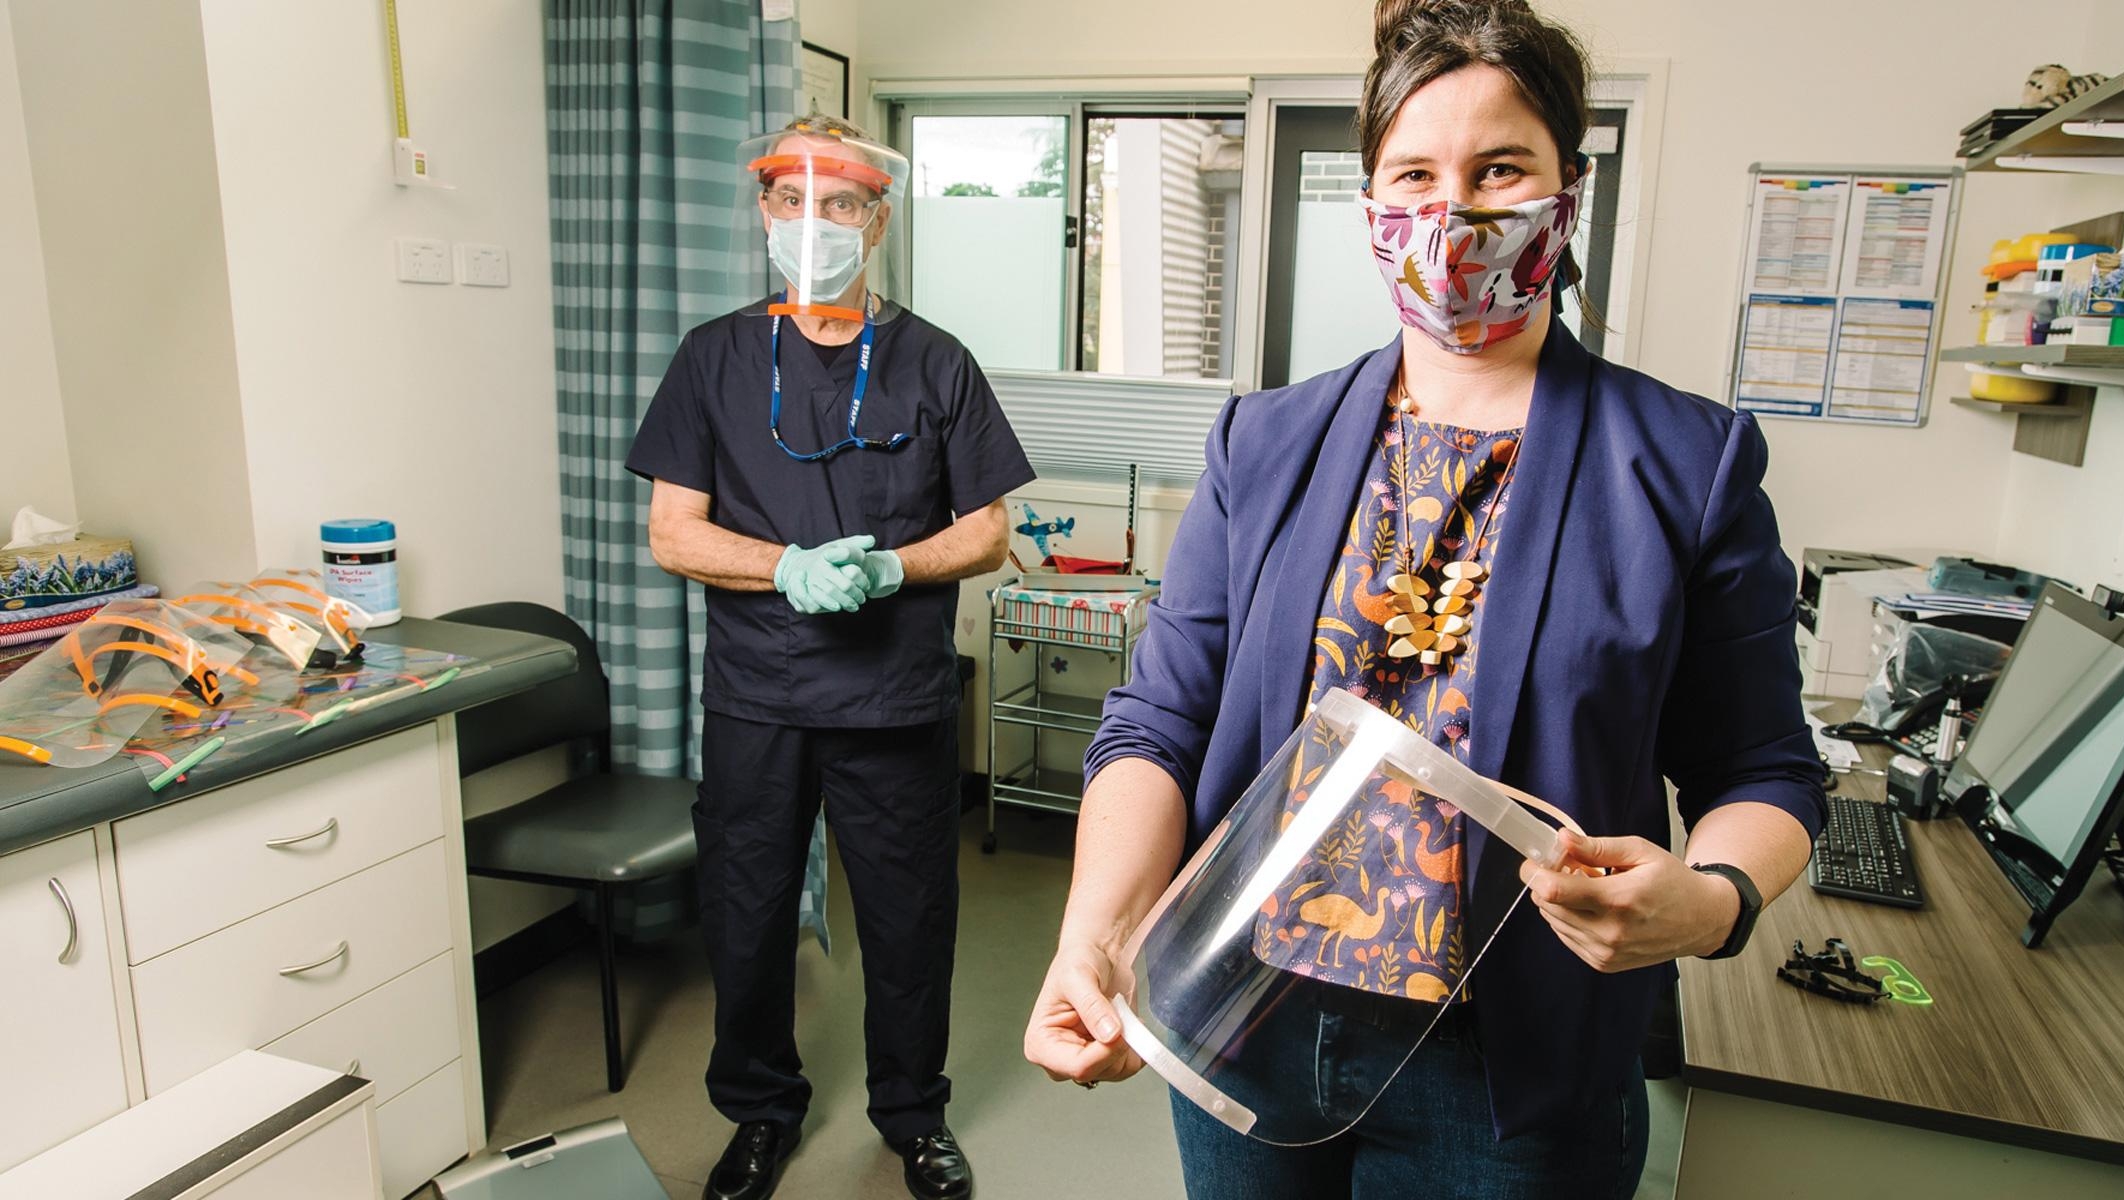 Face Shields for Healthcare Workers